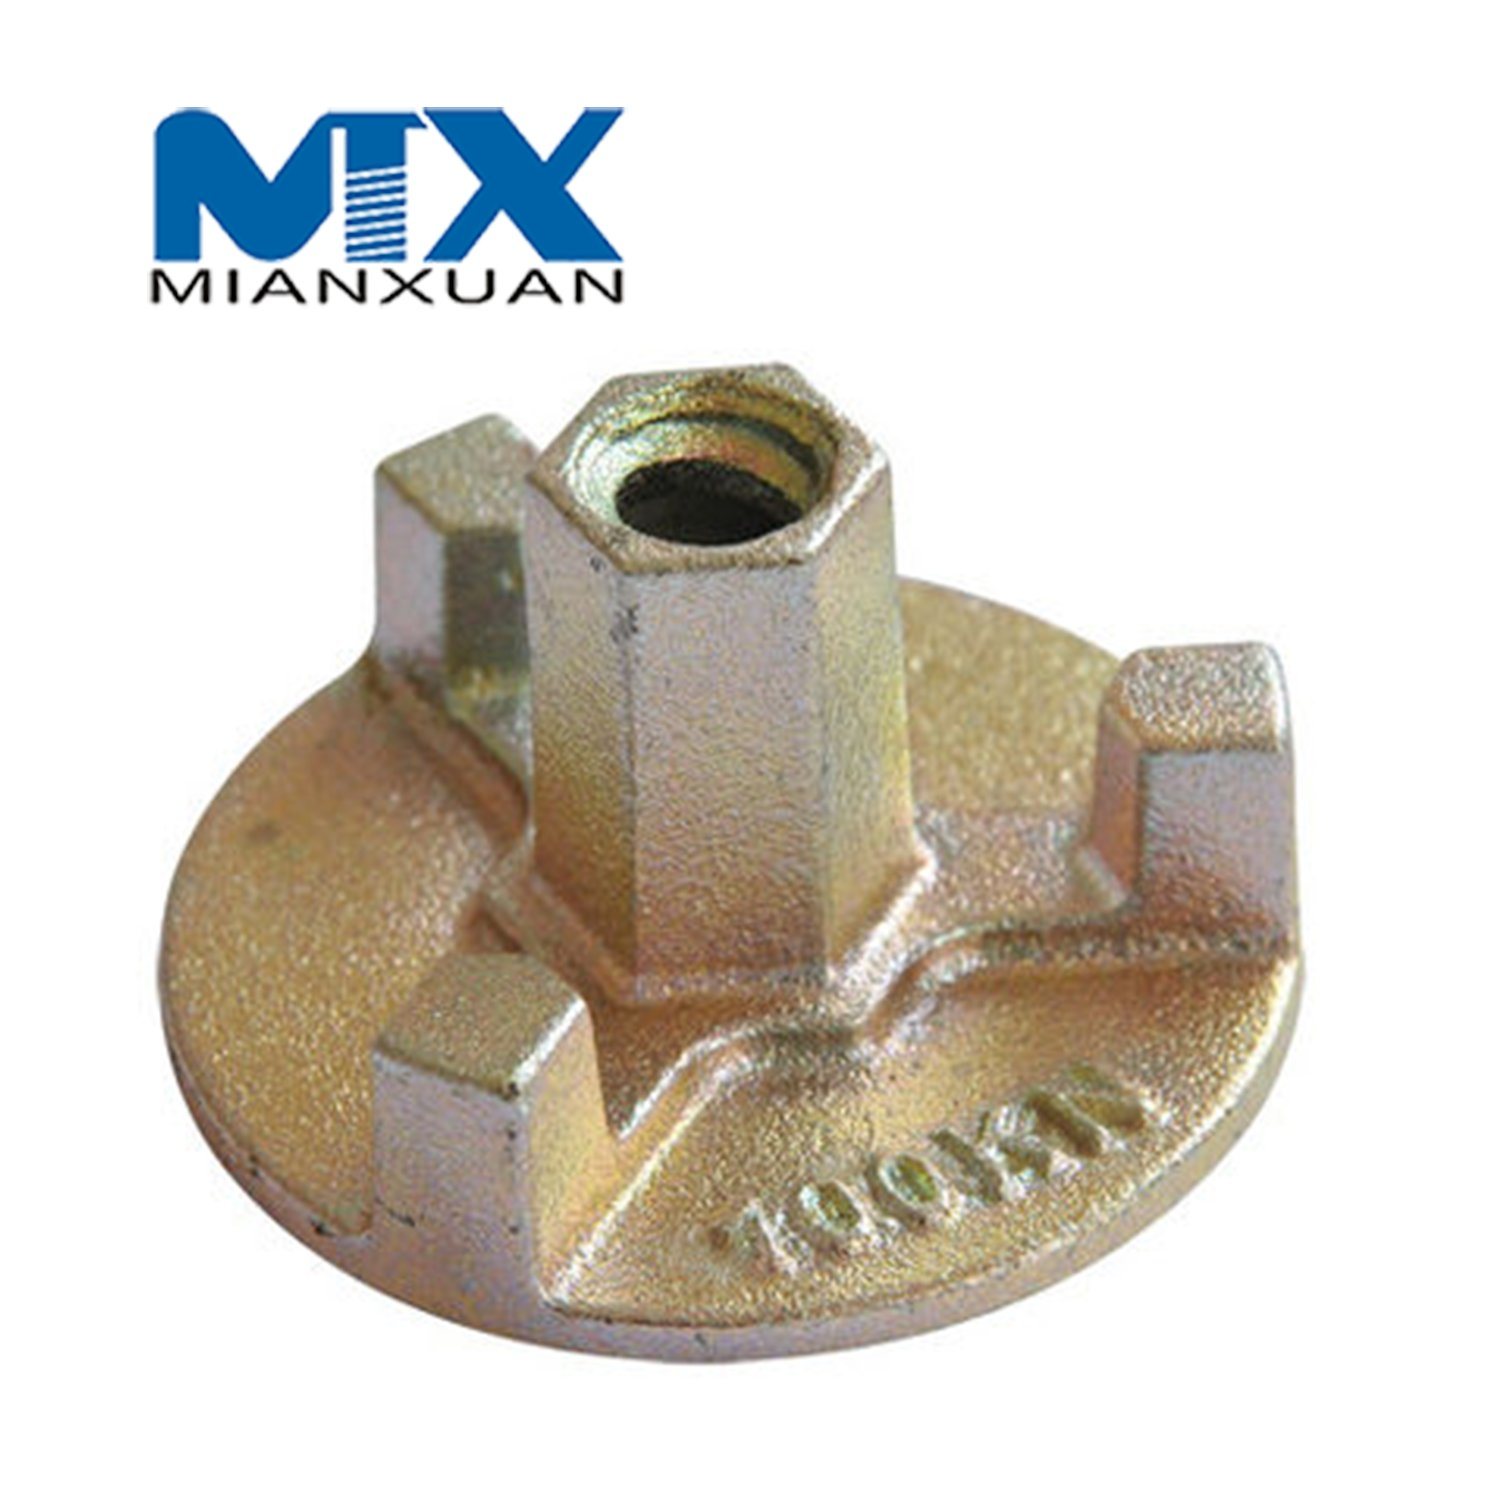 Building Concrete Steel Formwork Rebar Tie Rod Tension Nut Combination Casted Anchor Wing Nut